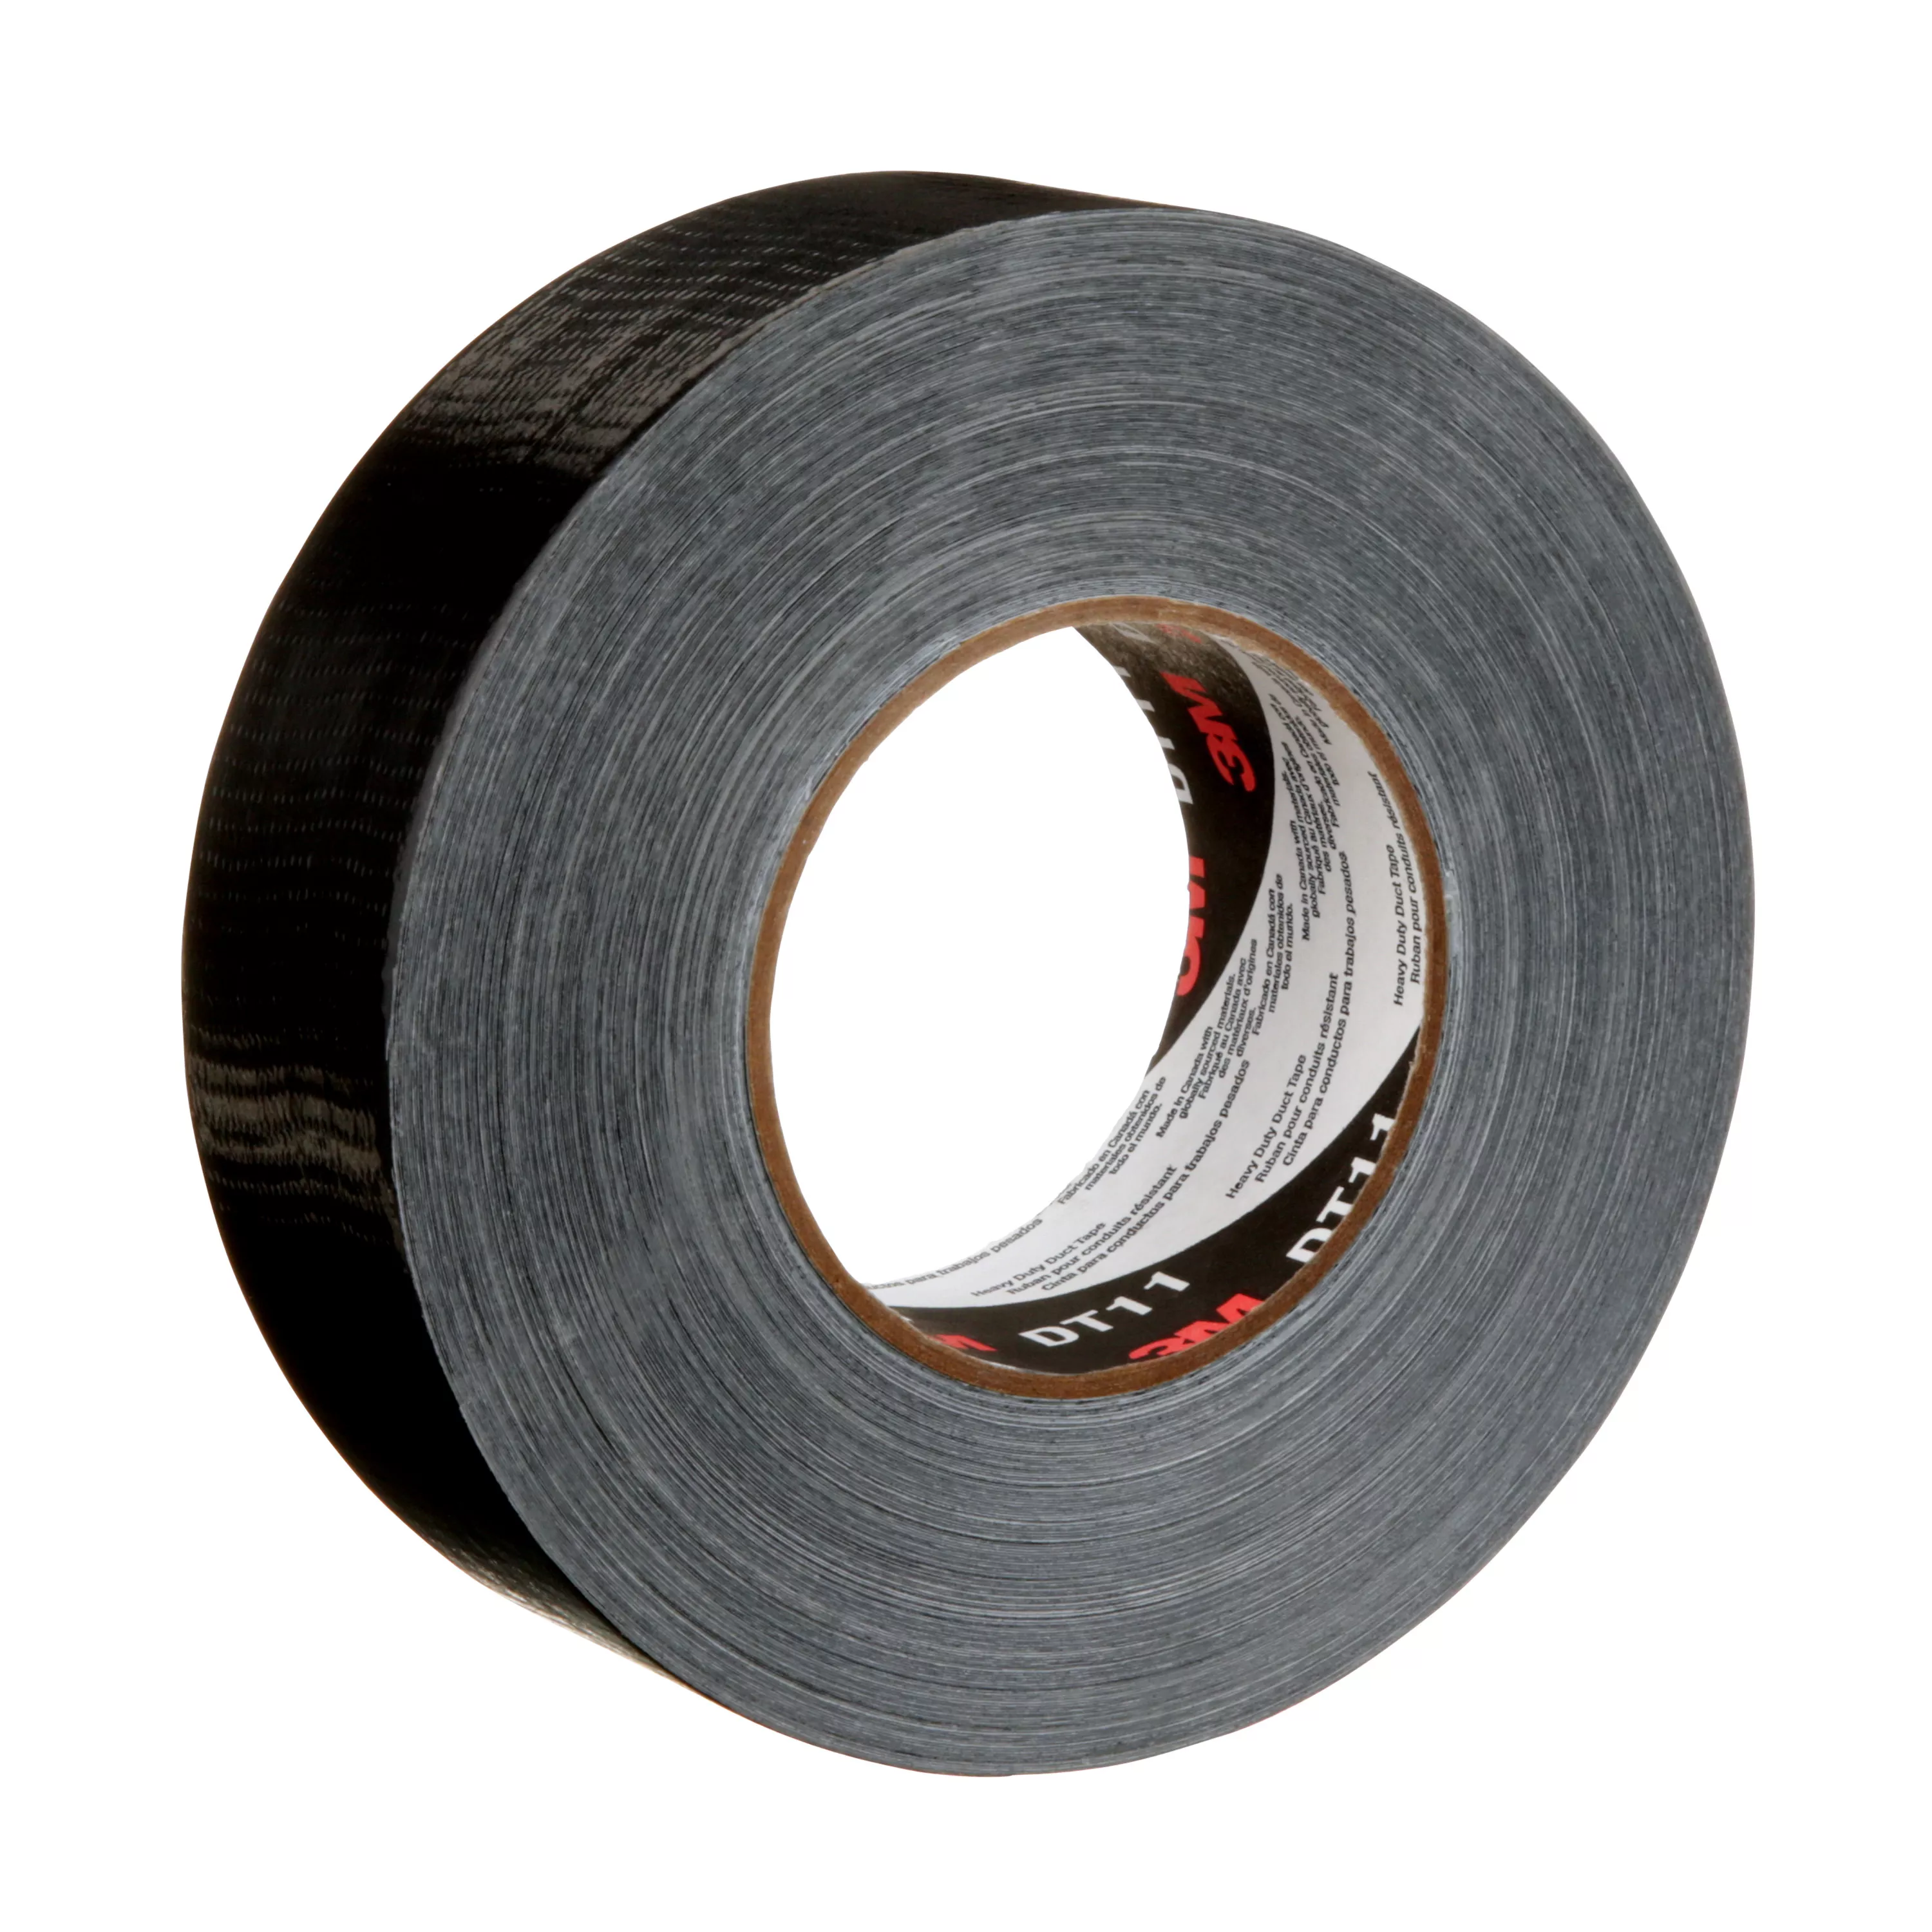 3M™ Heavy Duty Duct Tape DT11, Black, 48 mm x 54.8 m, 11 mil, 24 Roll/Case, Individually Wrapped Conveniently Packaged